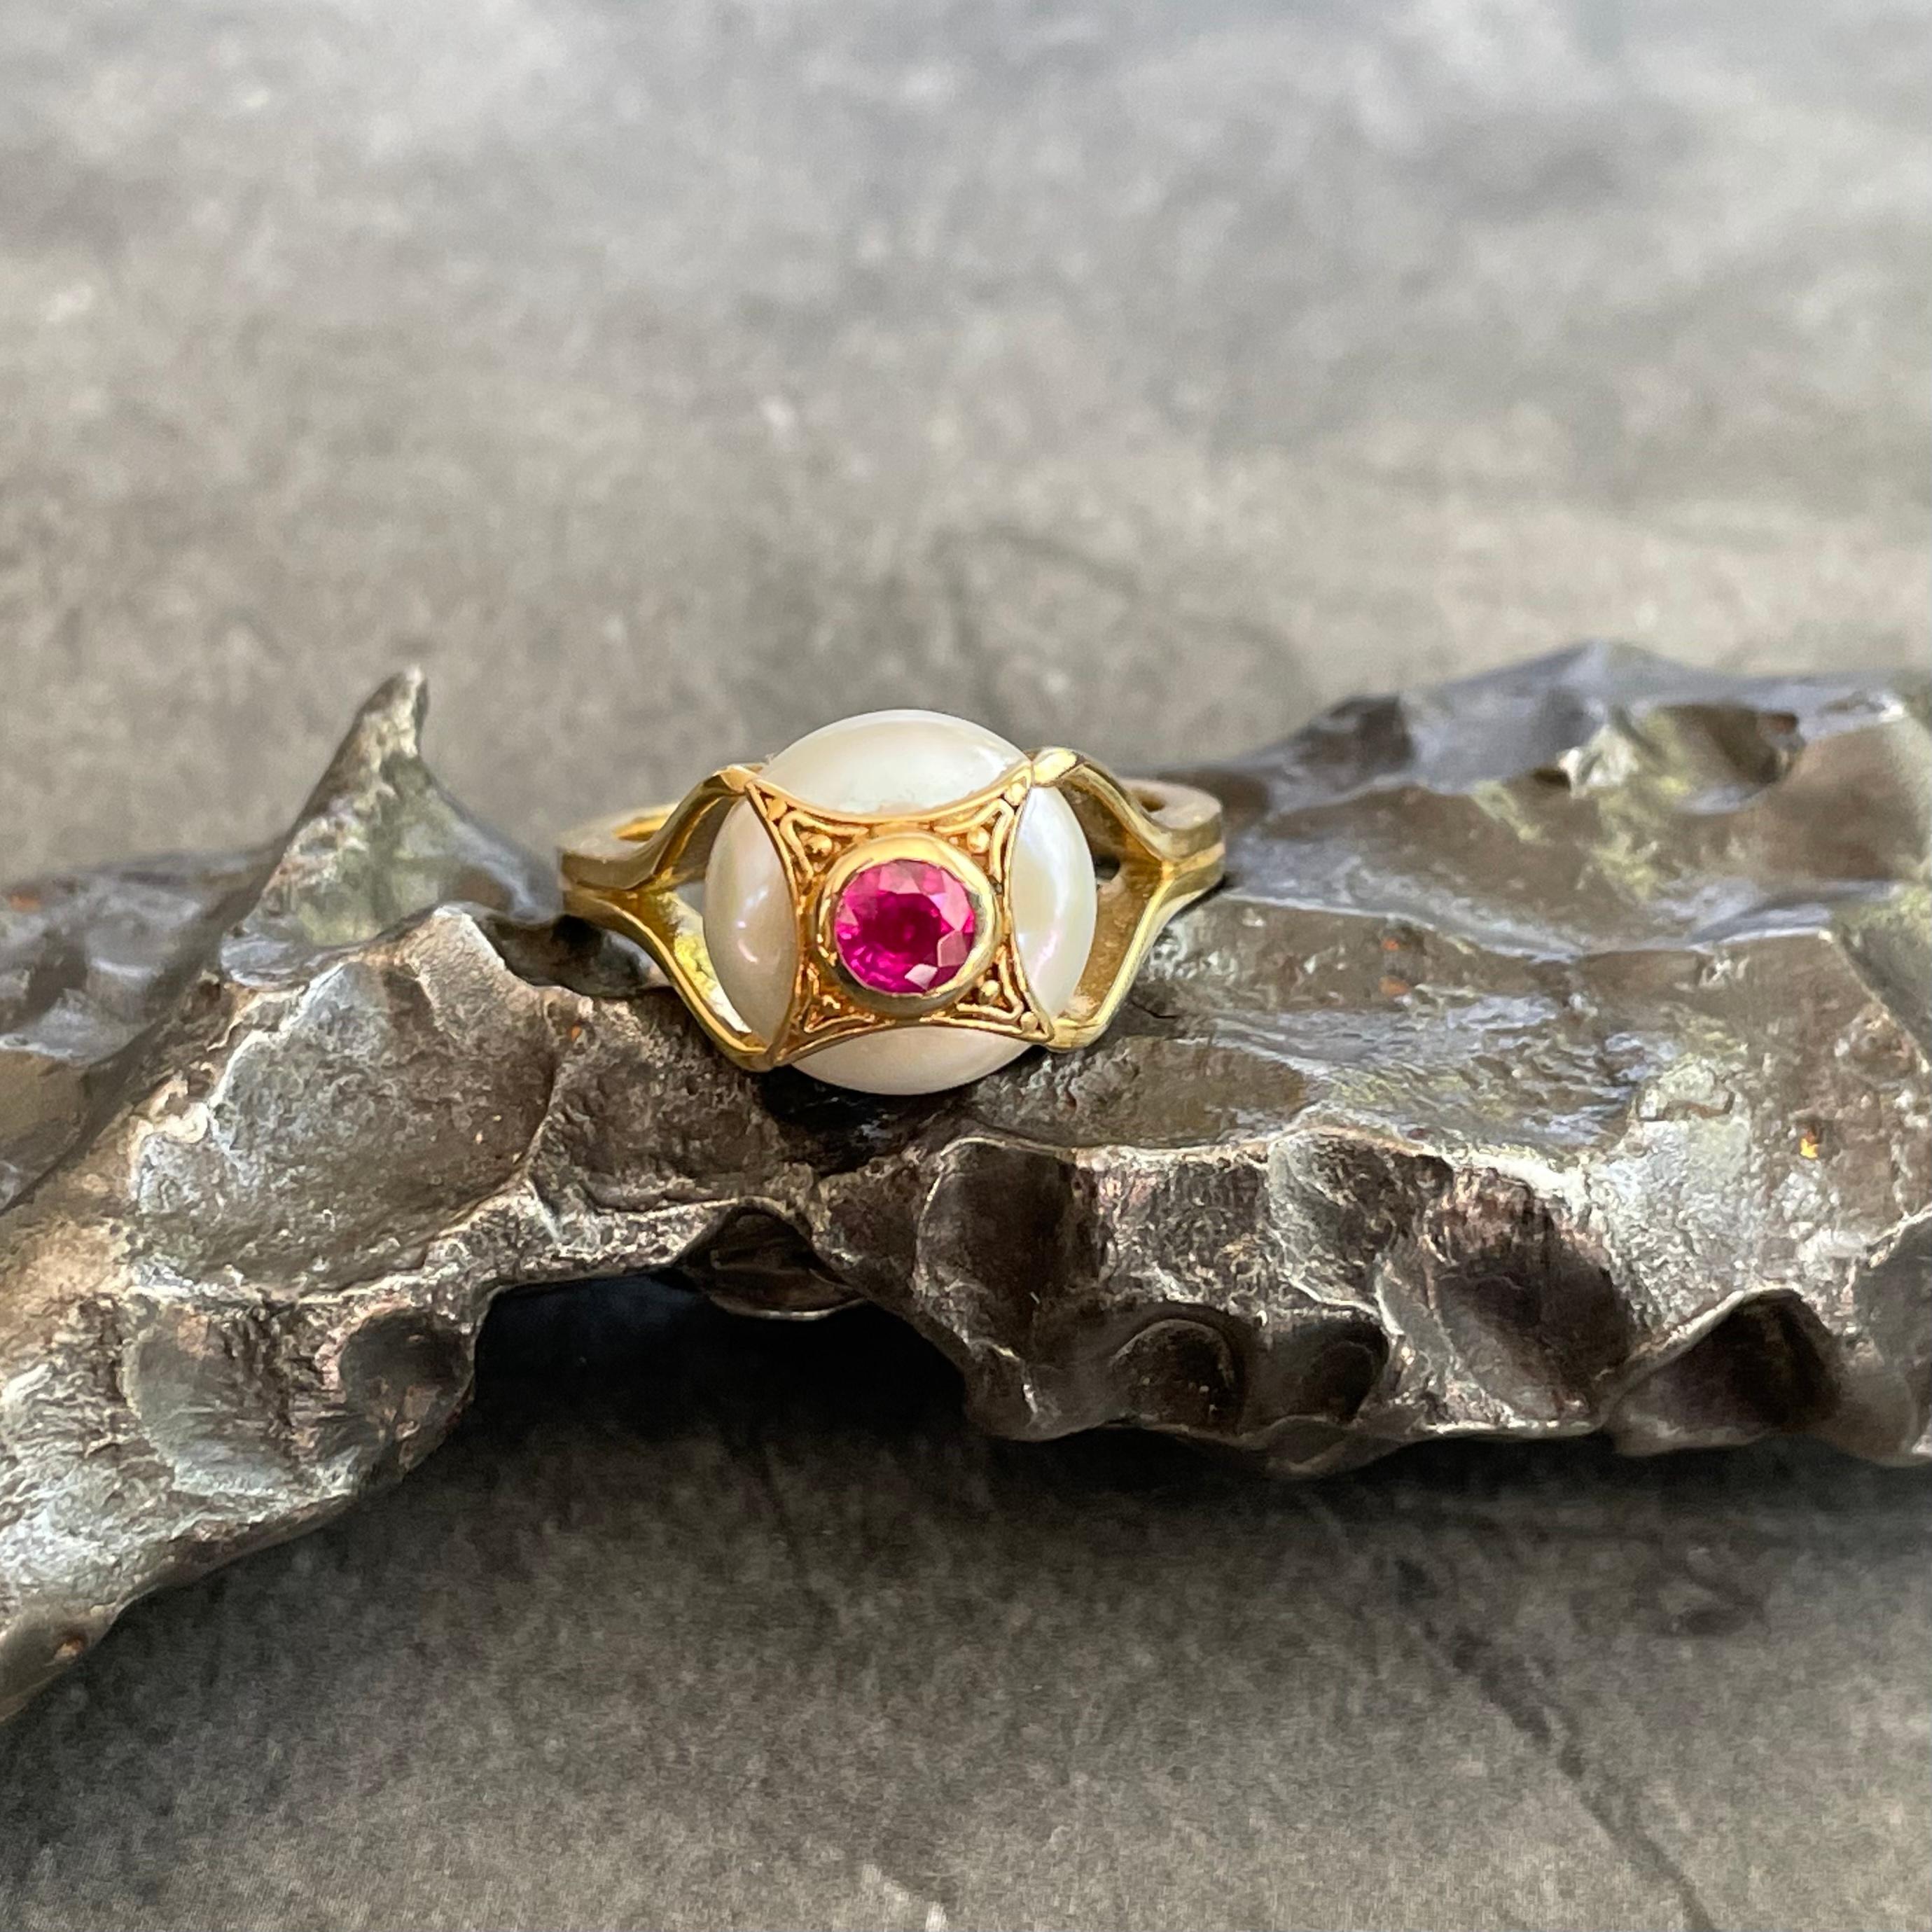 A combination of a white button pearl inset with a 4 mm faceted ruby and handmade wirework and granulation atop a split 18K shank is truly a one-of-a kind design showing the colors of white, gold, and ruby pink. This ring is currently sized 7. It is